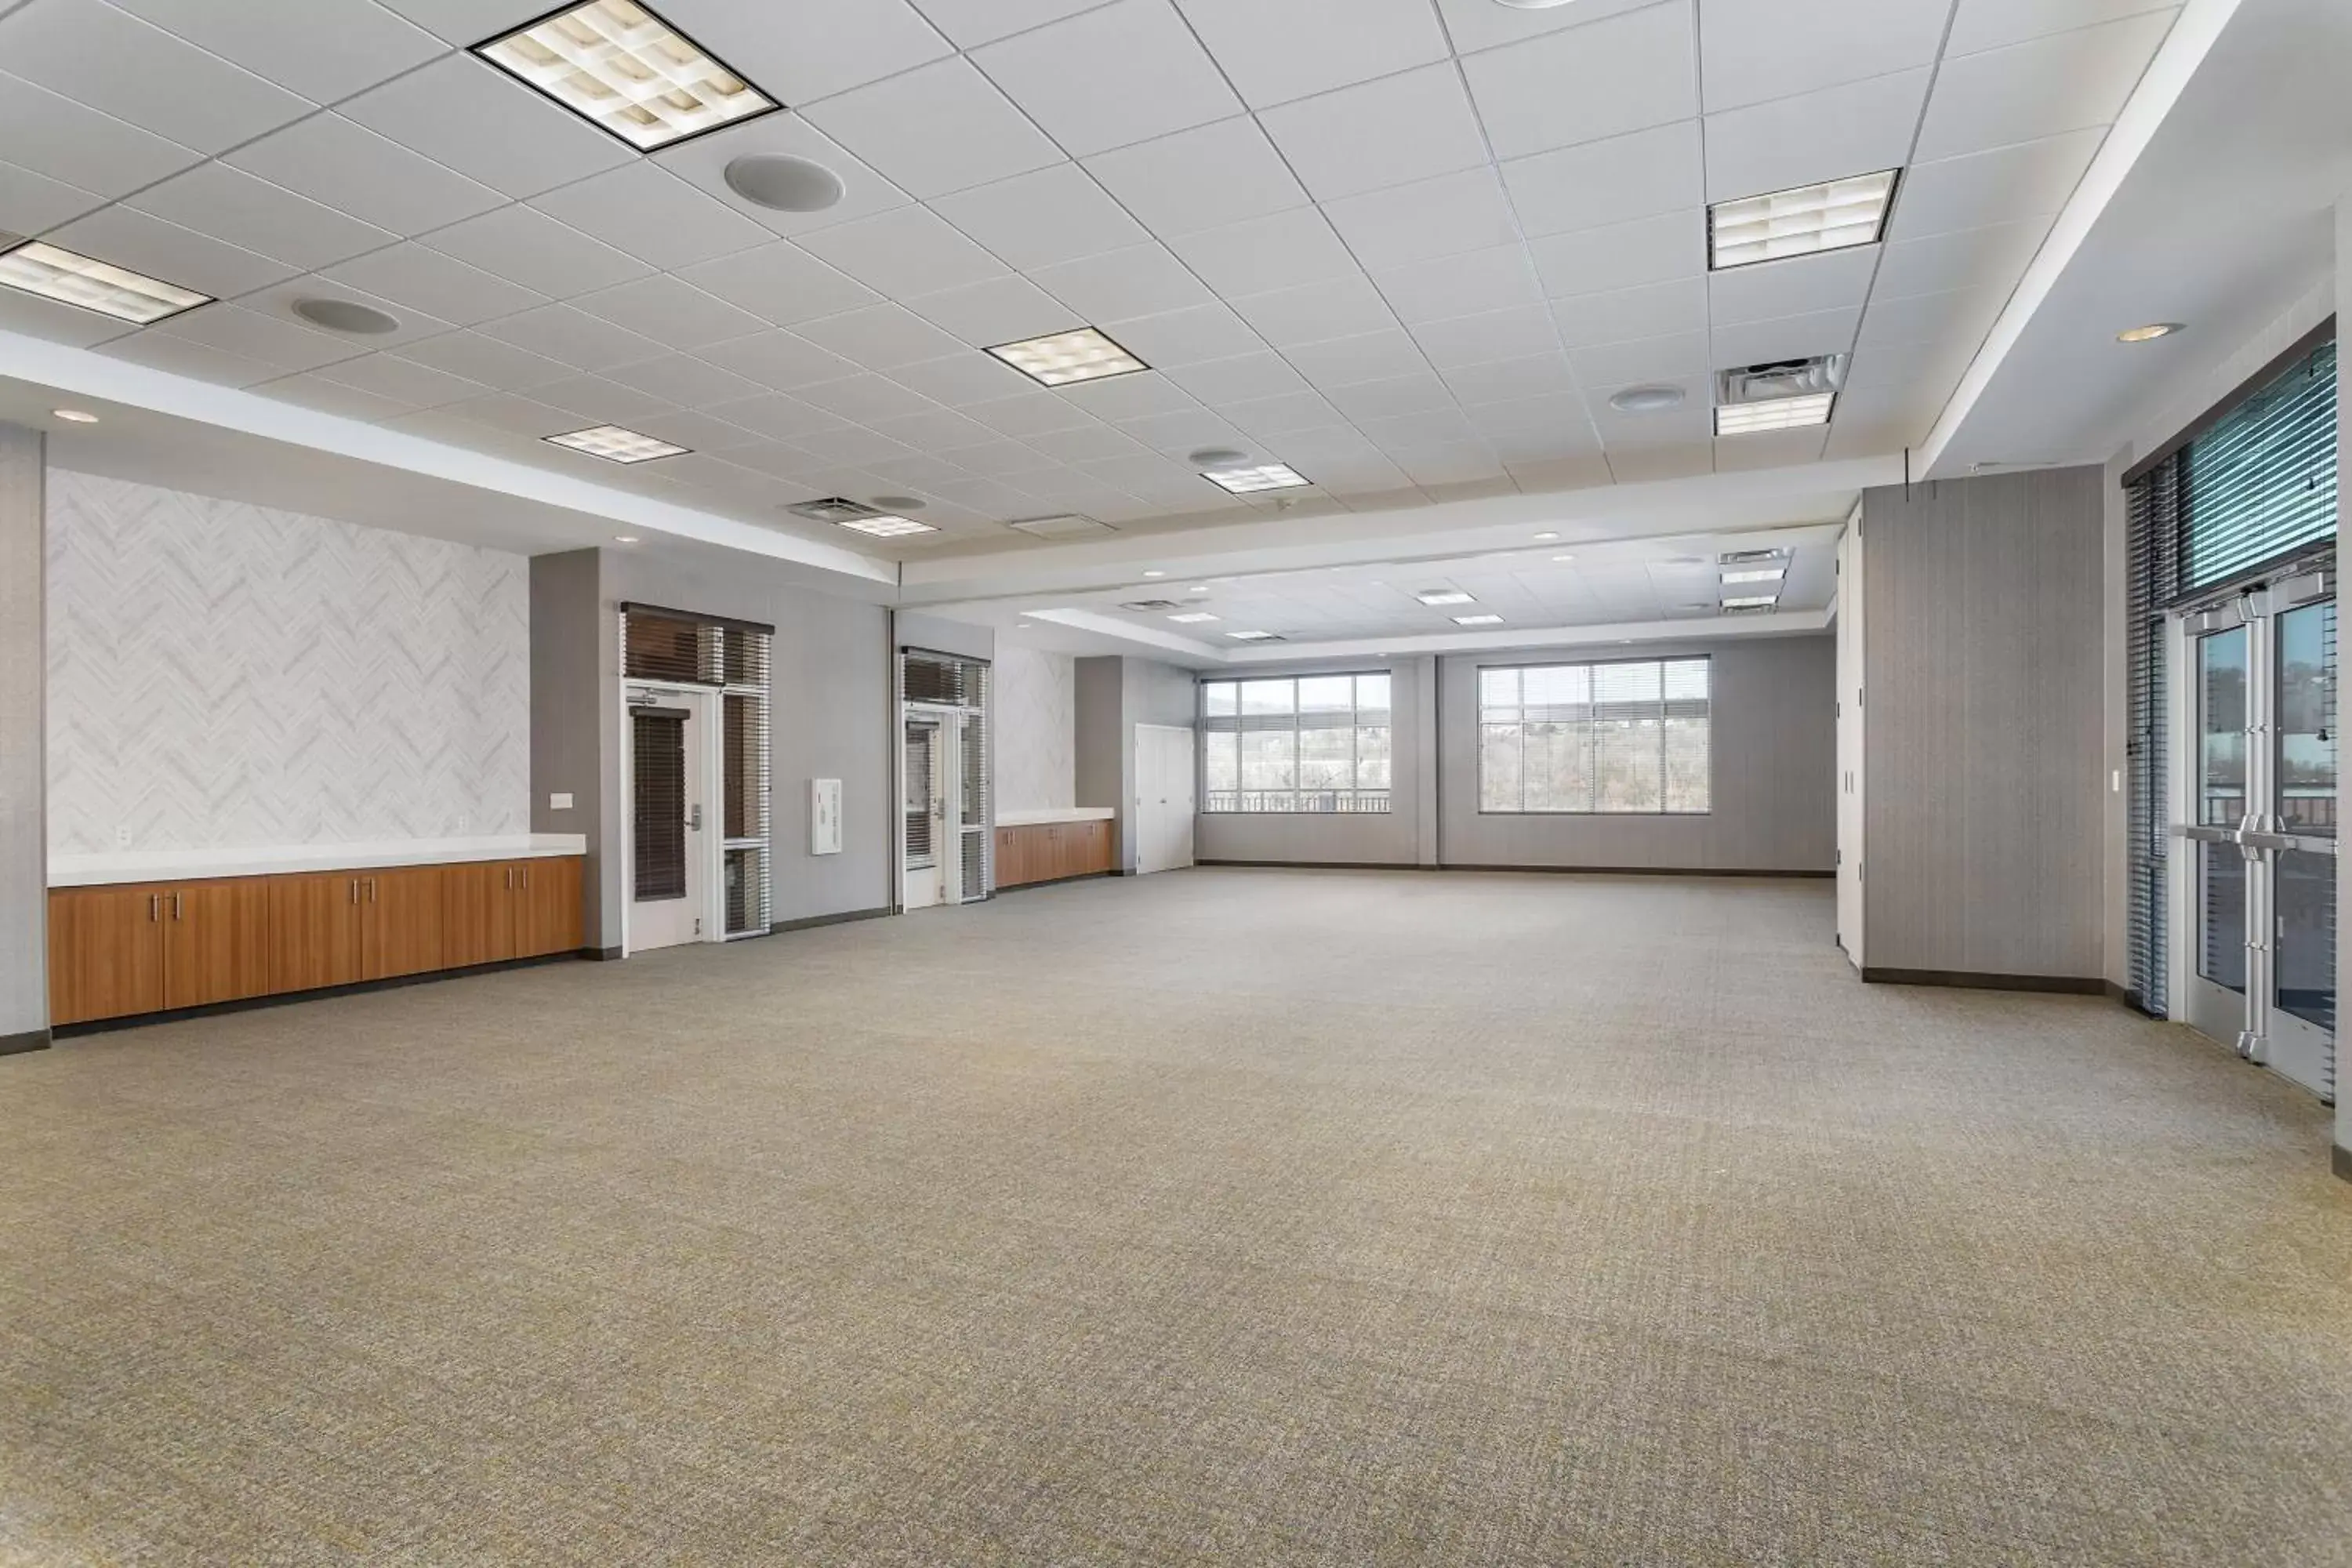 Meeting/conference room in SpringHill Suites by Marriott Downtown Chattanooga/Cameron Harbor